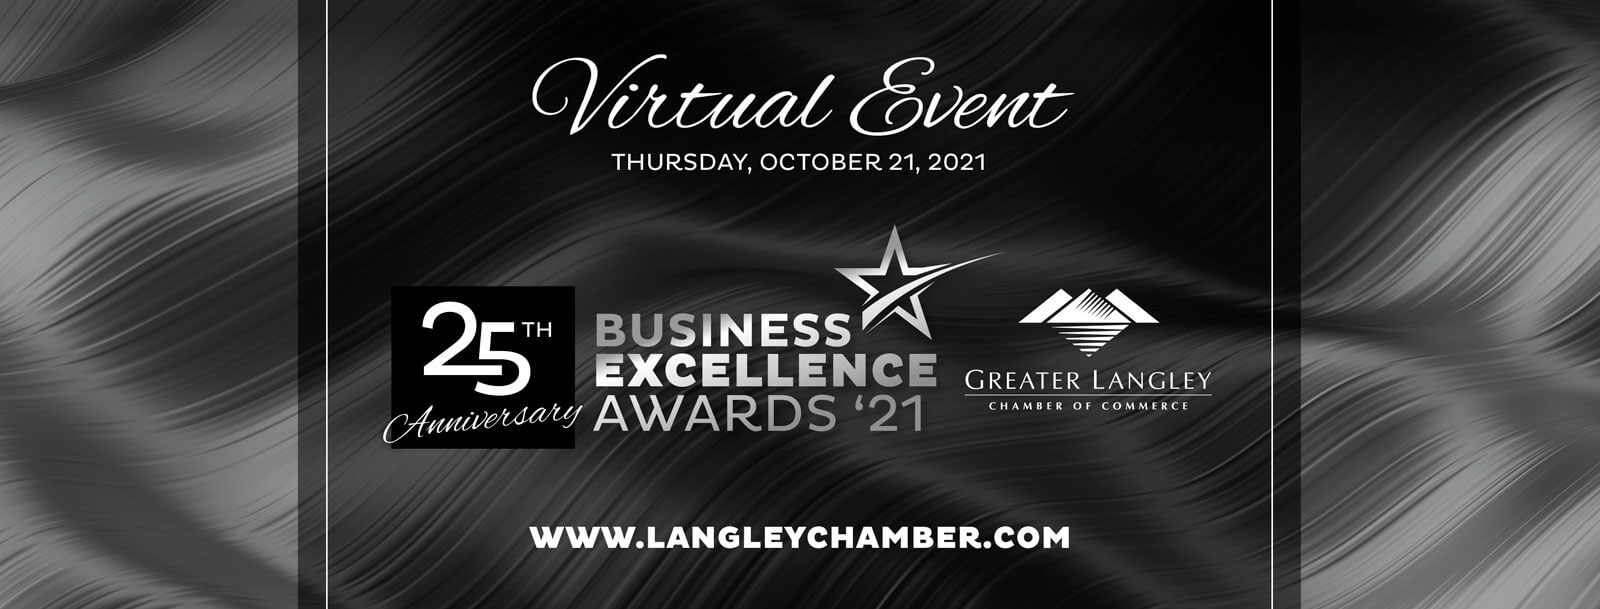 business excellence award banner